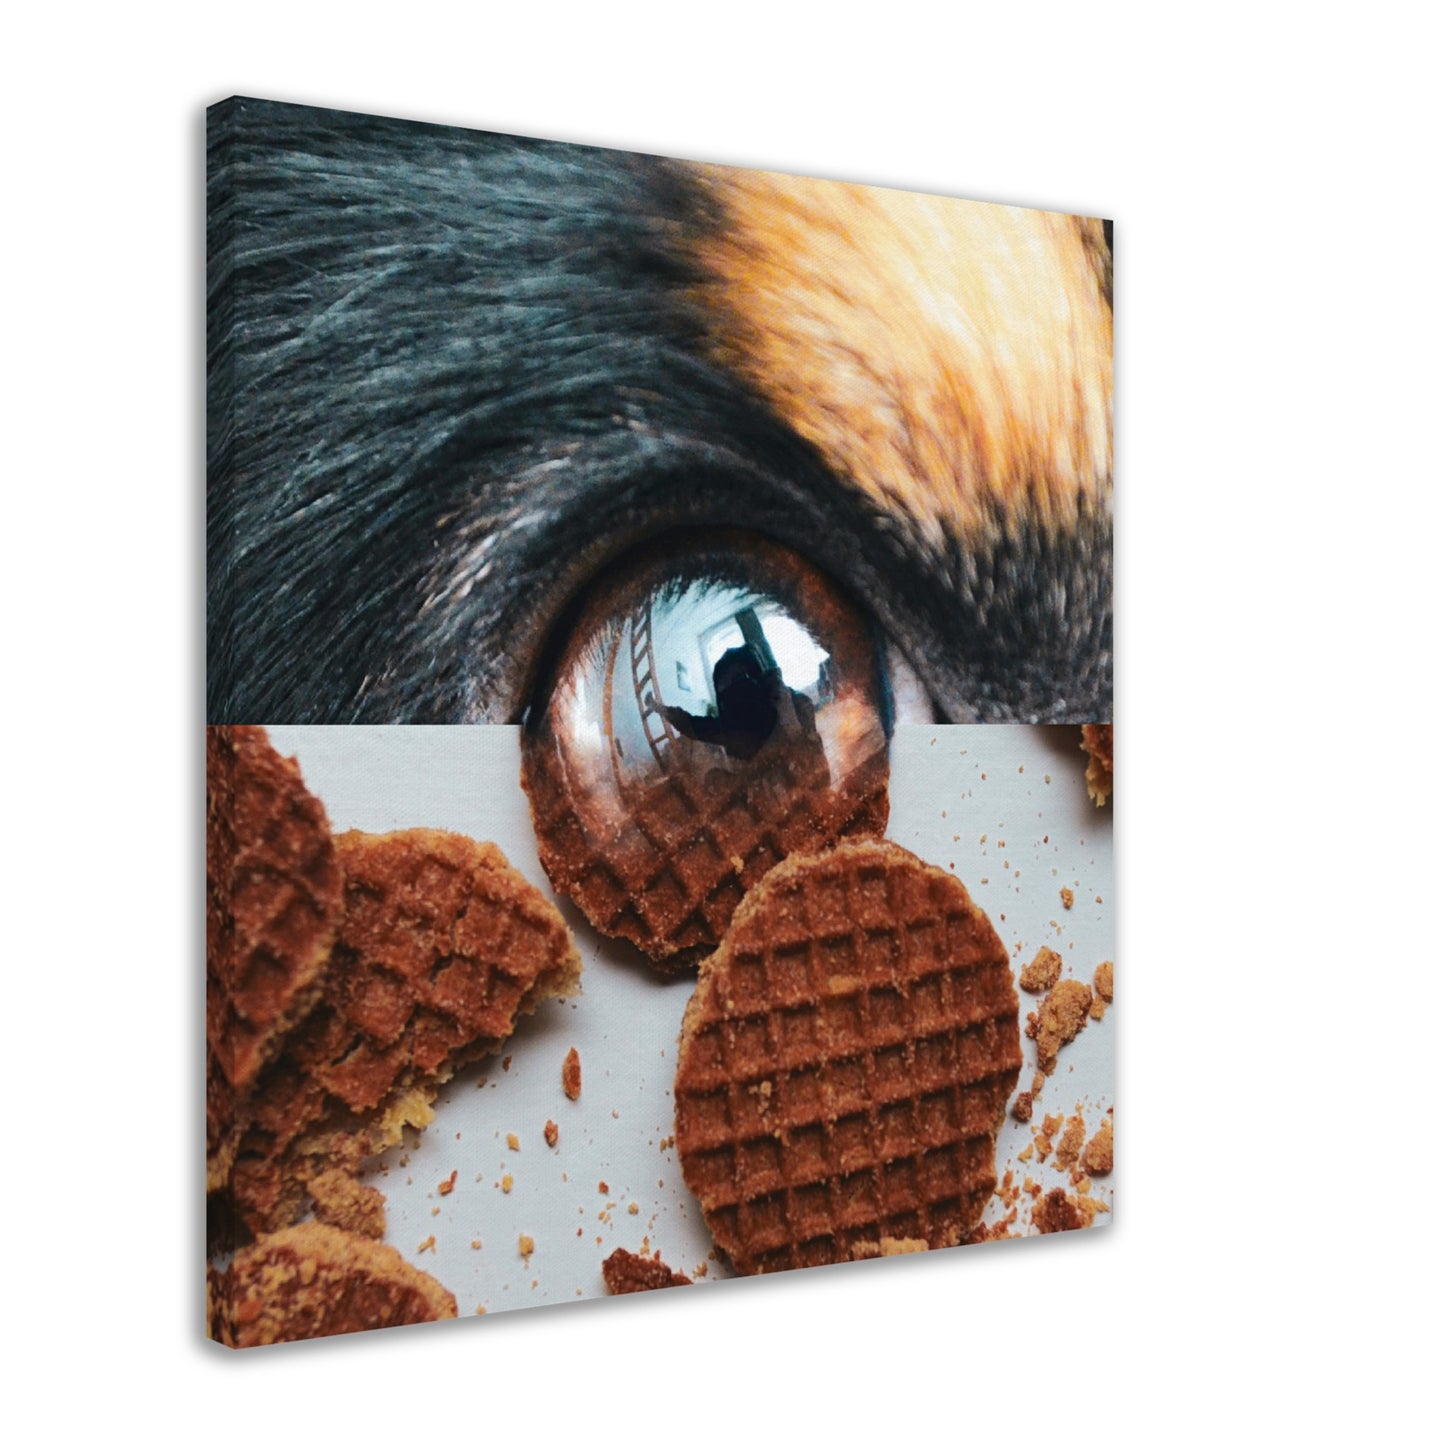 One Treat A Day, Keeps The Doctor Away - Canvas Print